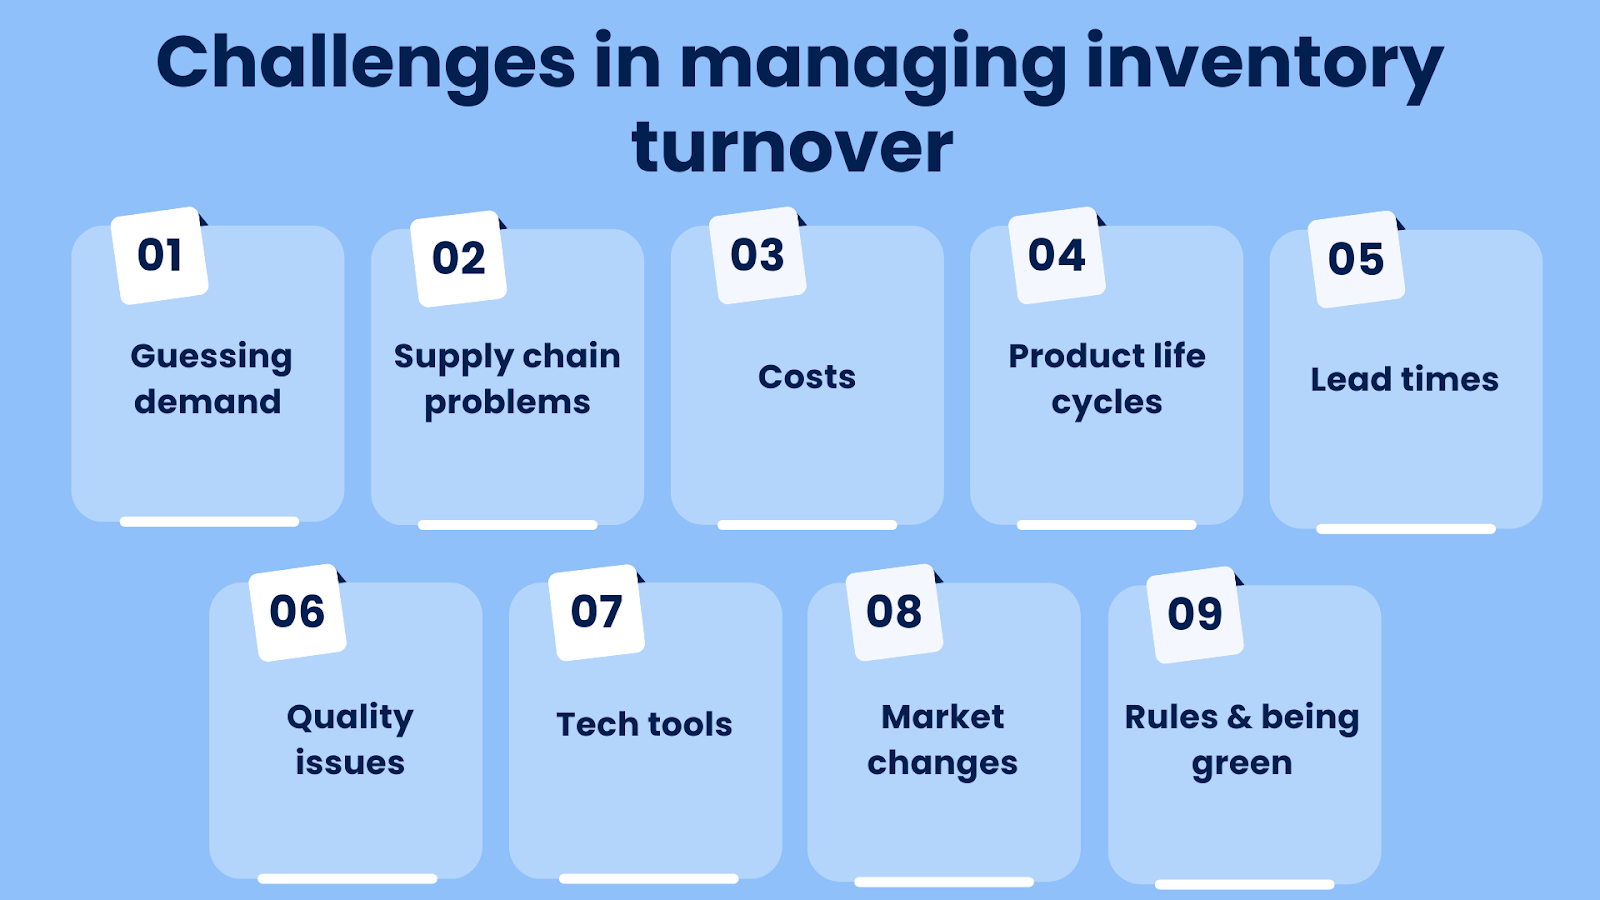 Challenges in managing inventory turnover